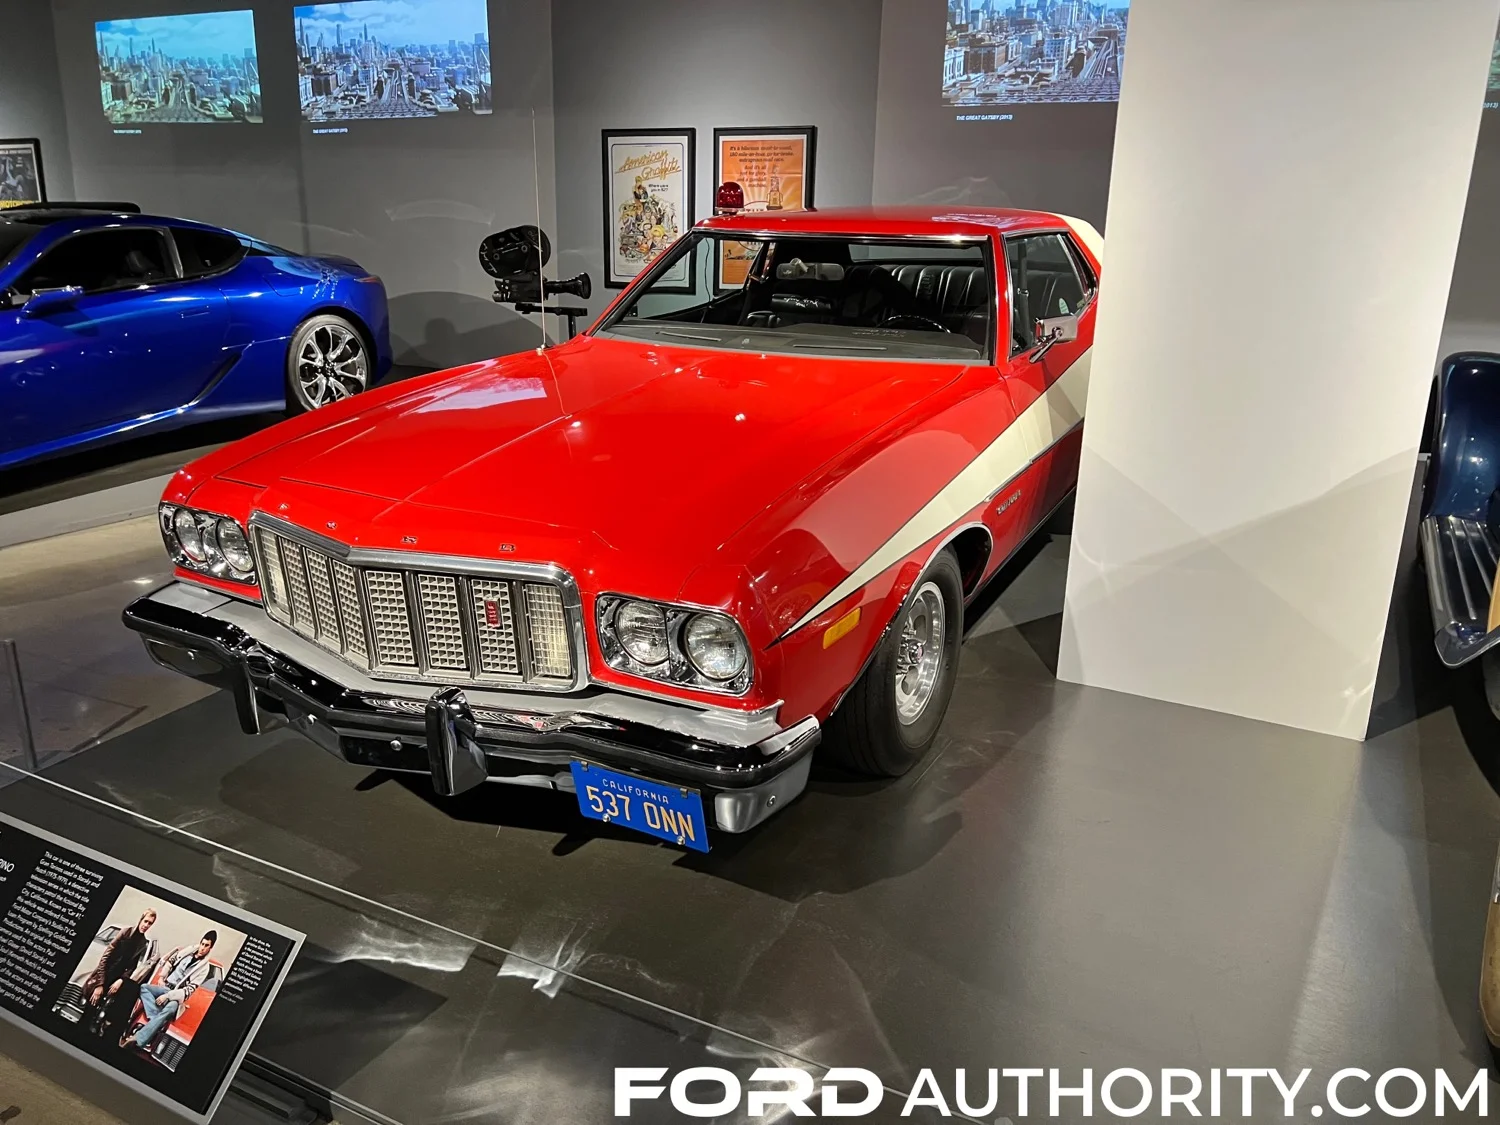 This 1976 Ford Gran Torino Starred In 'Starsky And Hutch